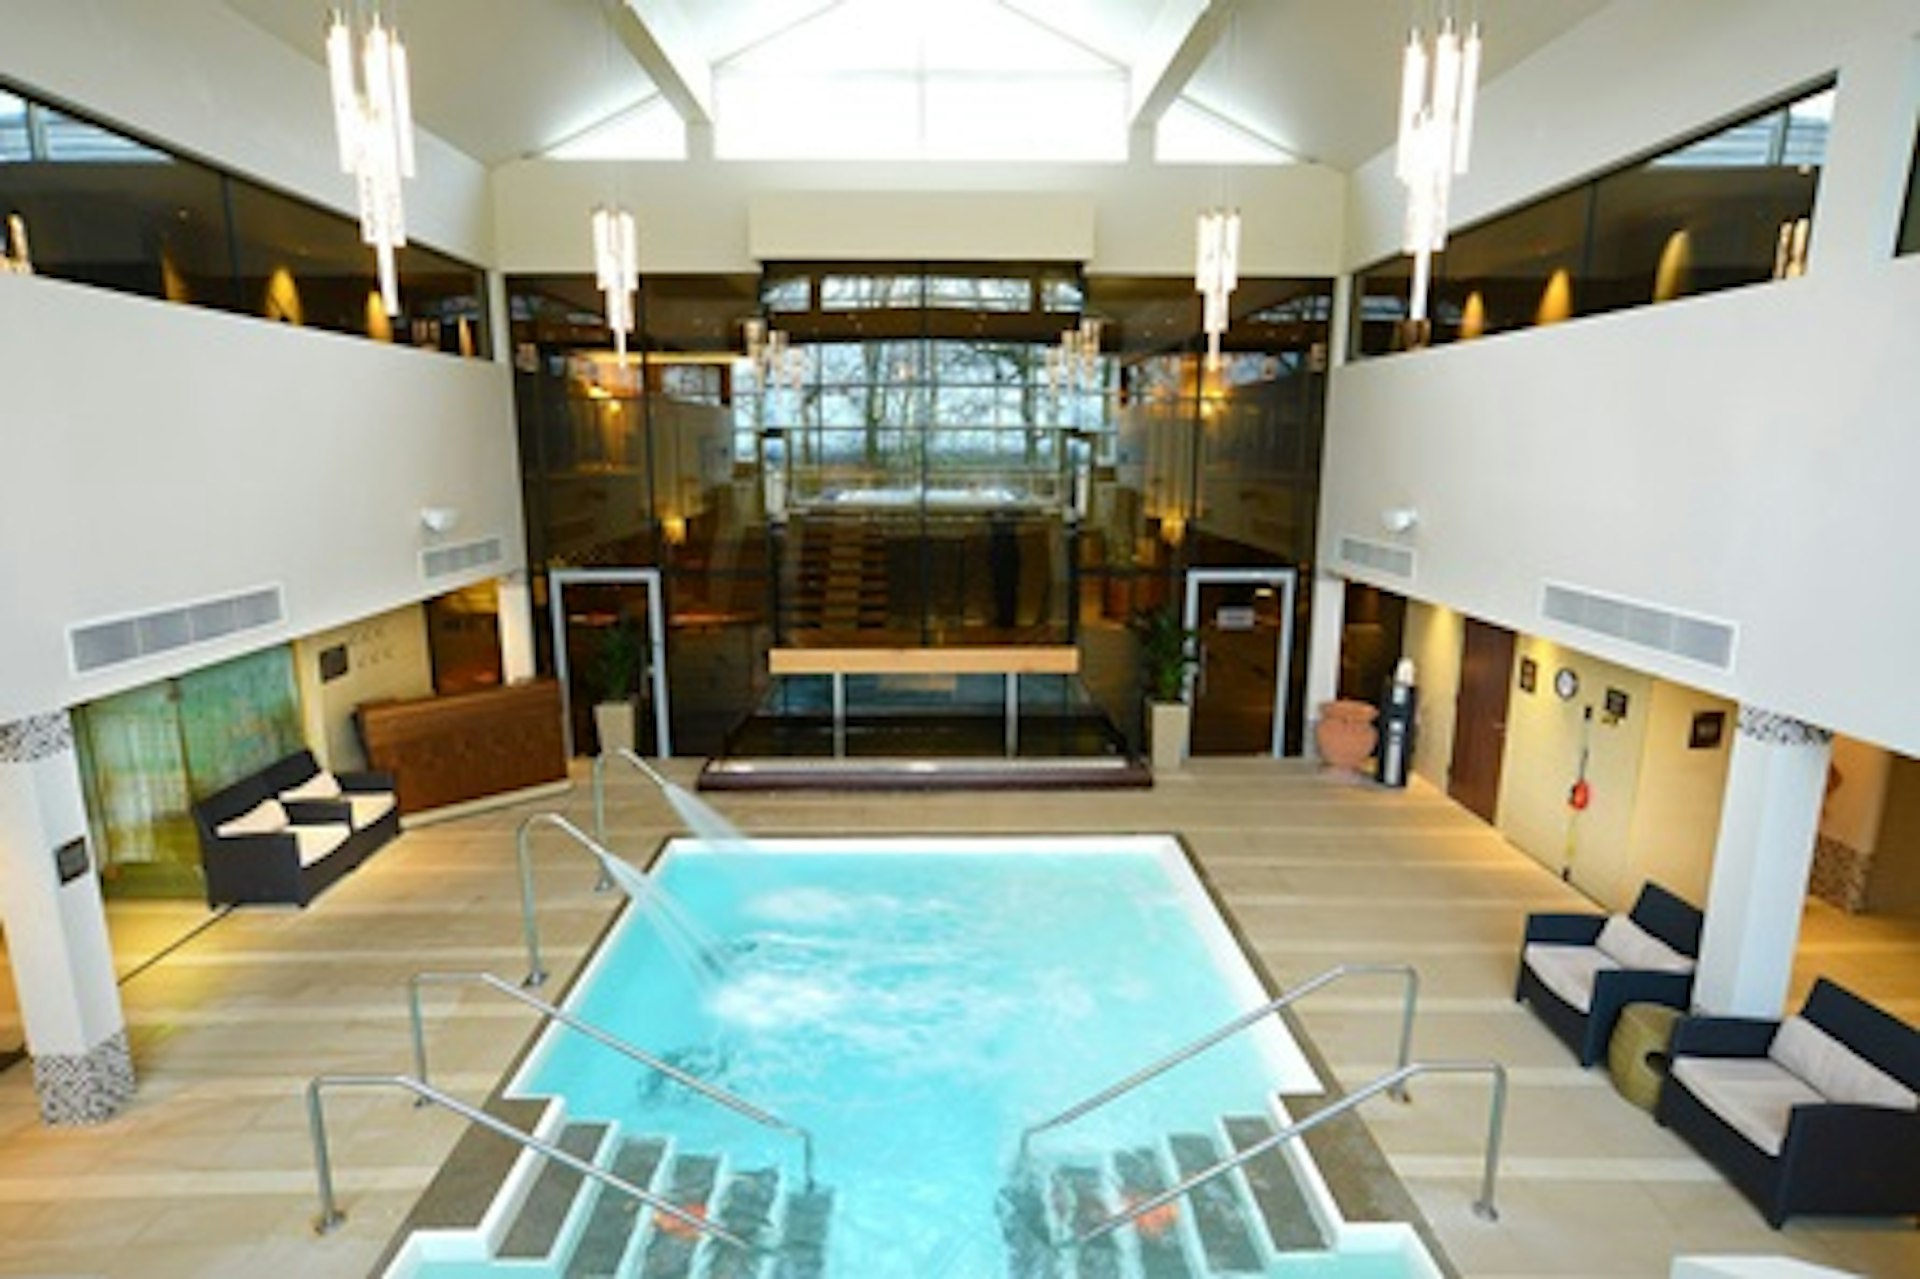 Weekend Aqua Thermal Journey with Afternoon Tea for Two at Ribby Hall Village 2